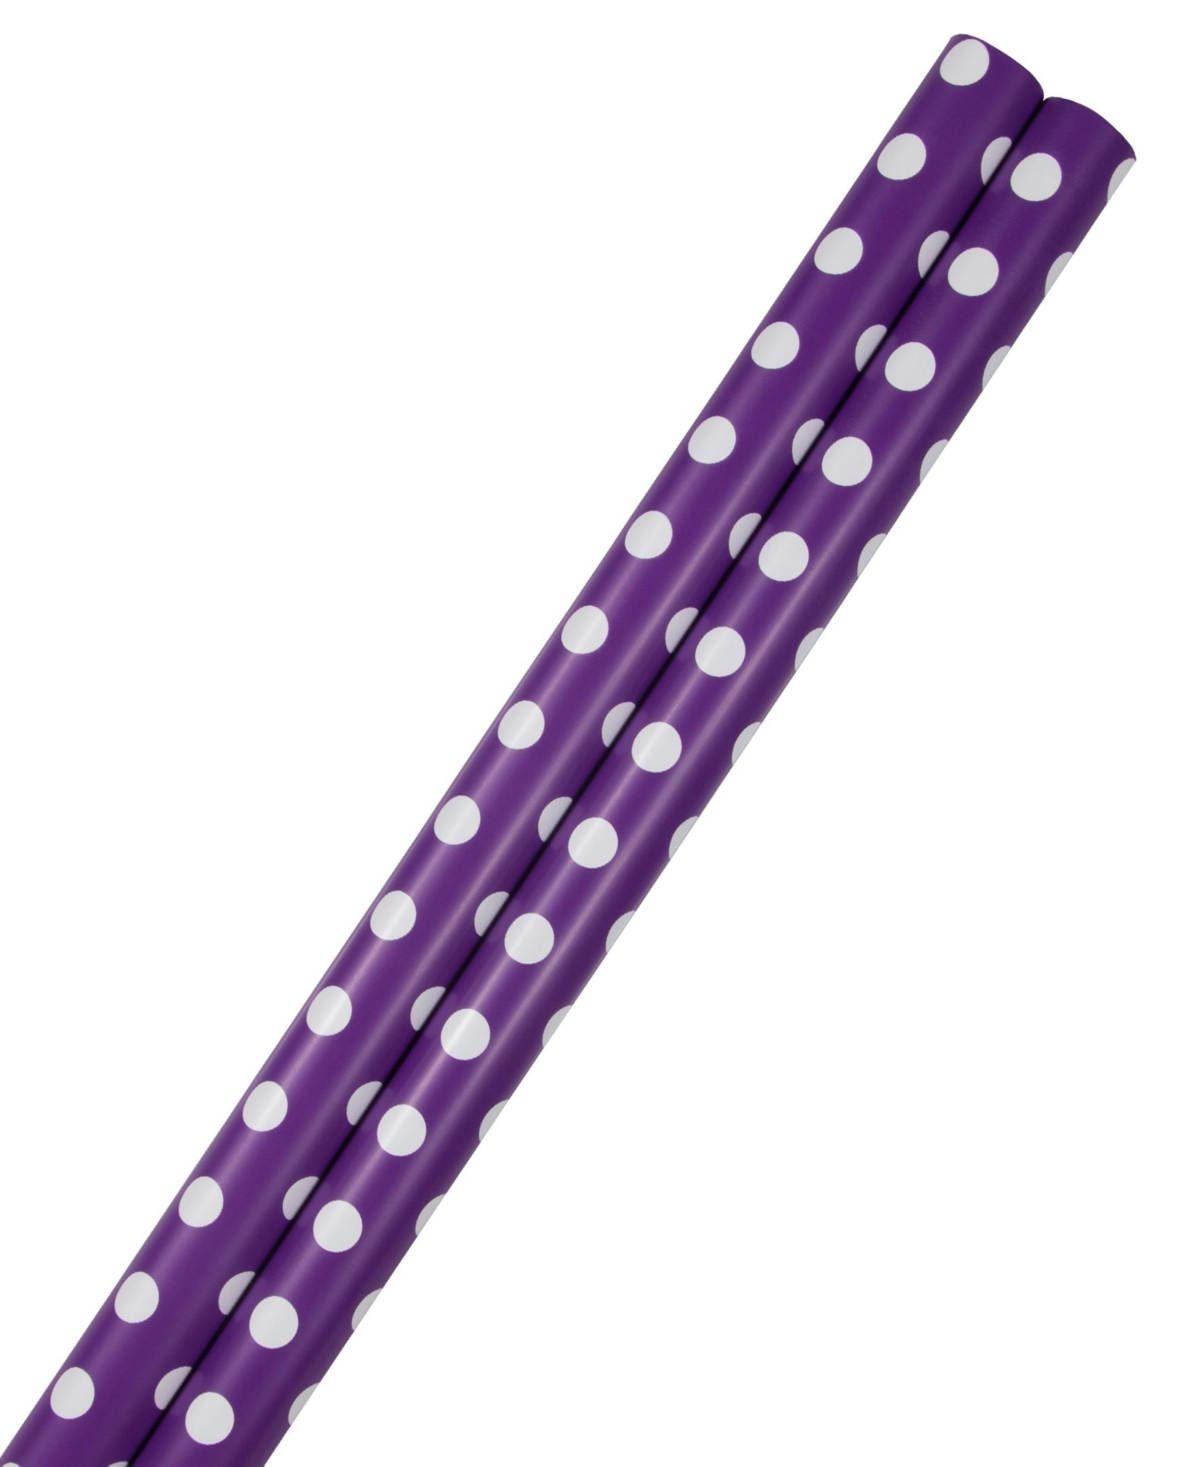 Shop Jam Paper Gift Wrap 50 Square Feet Polka Dot Wrapping Paper Rolls, Pack Of 2 In Purple,white